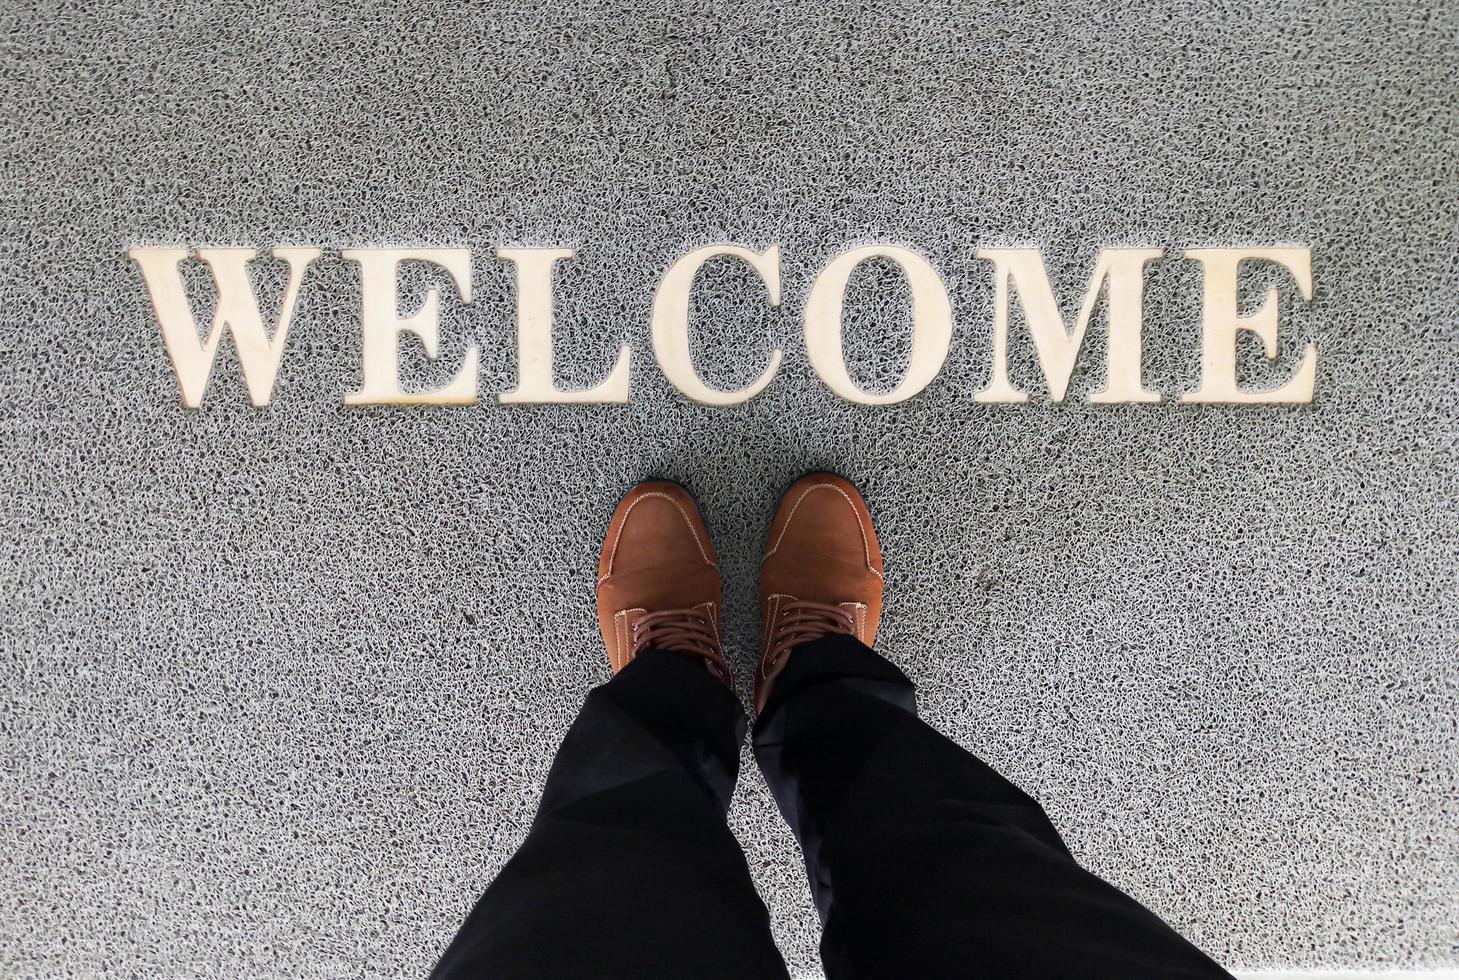 Overhead view of man standing on a welcome mat photo